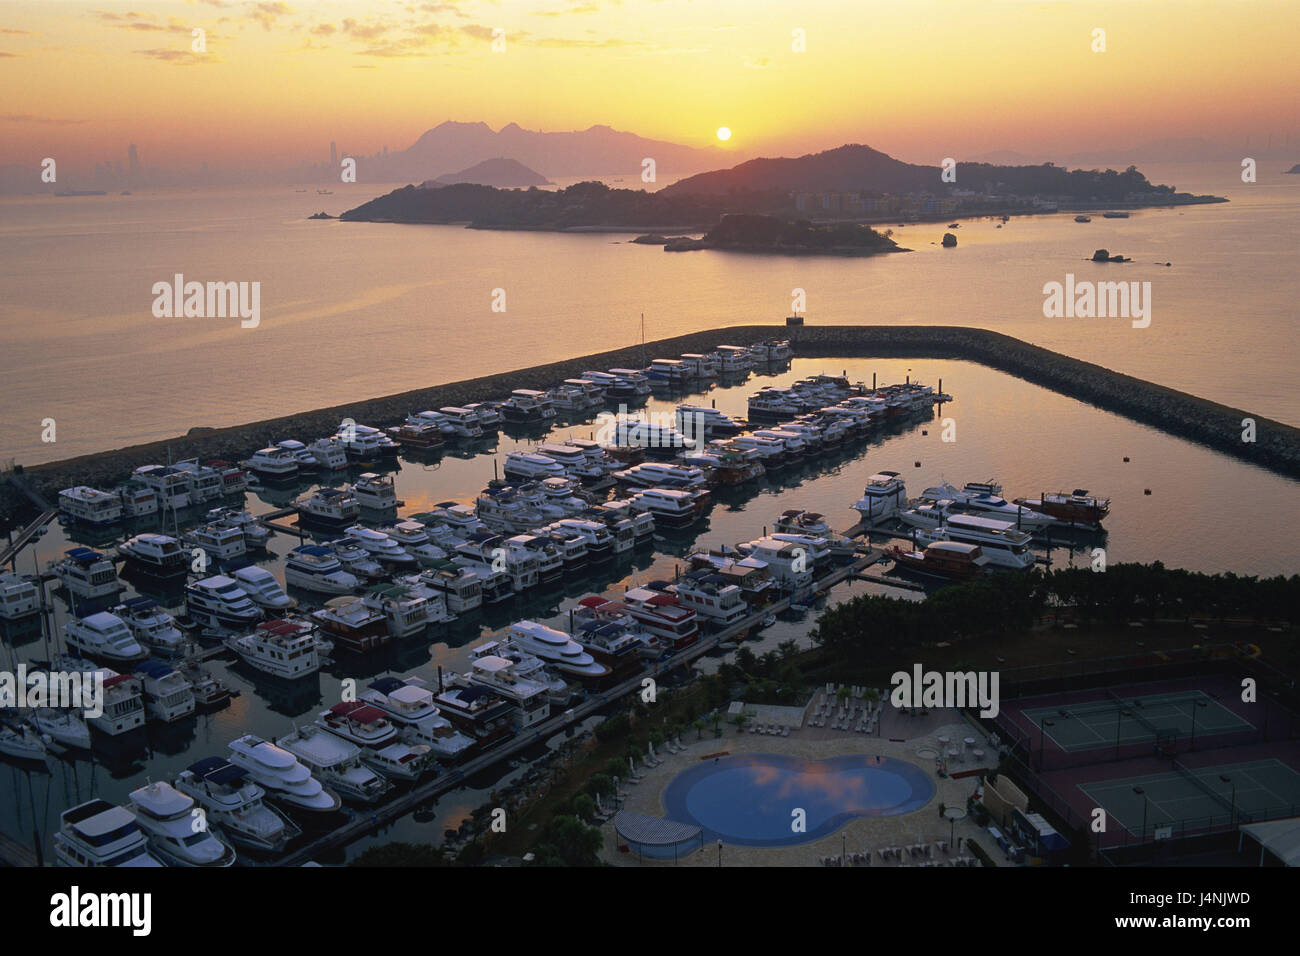 China, Hong Kong, Bang Chau Iceland, Discovery Bay, harbour, sunrise, Asia, island, islands, bay, boats, overview, neighbouring island, tourism, leisure time, travel, tuning, morning, morning tuning, daybreak, dusk, daybreak, silence, rest, Stock Photo